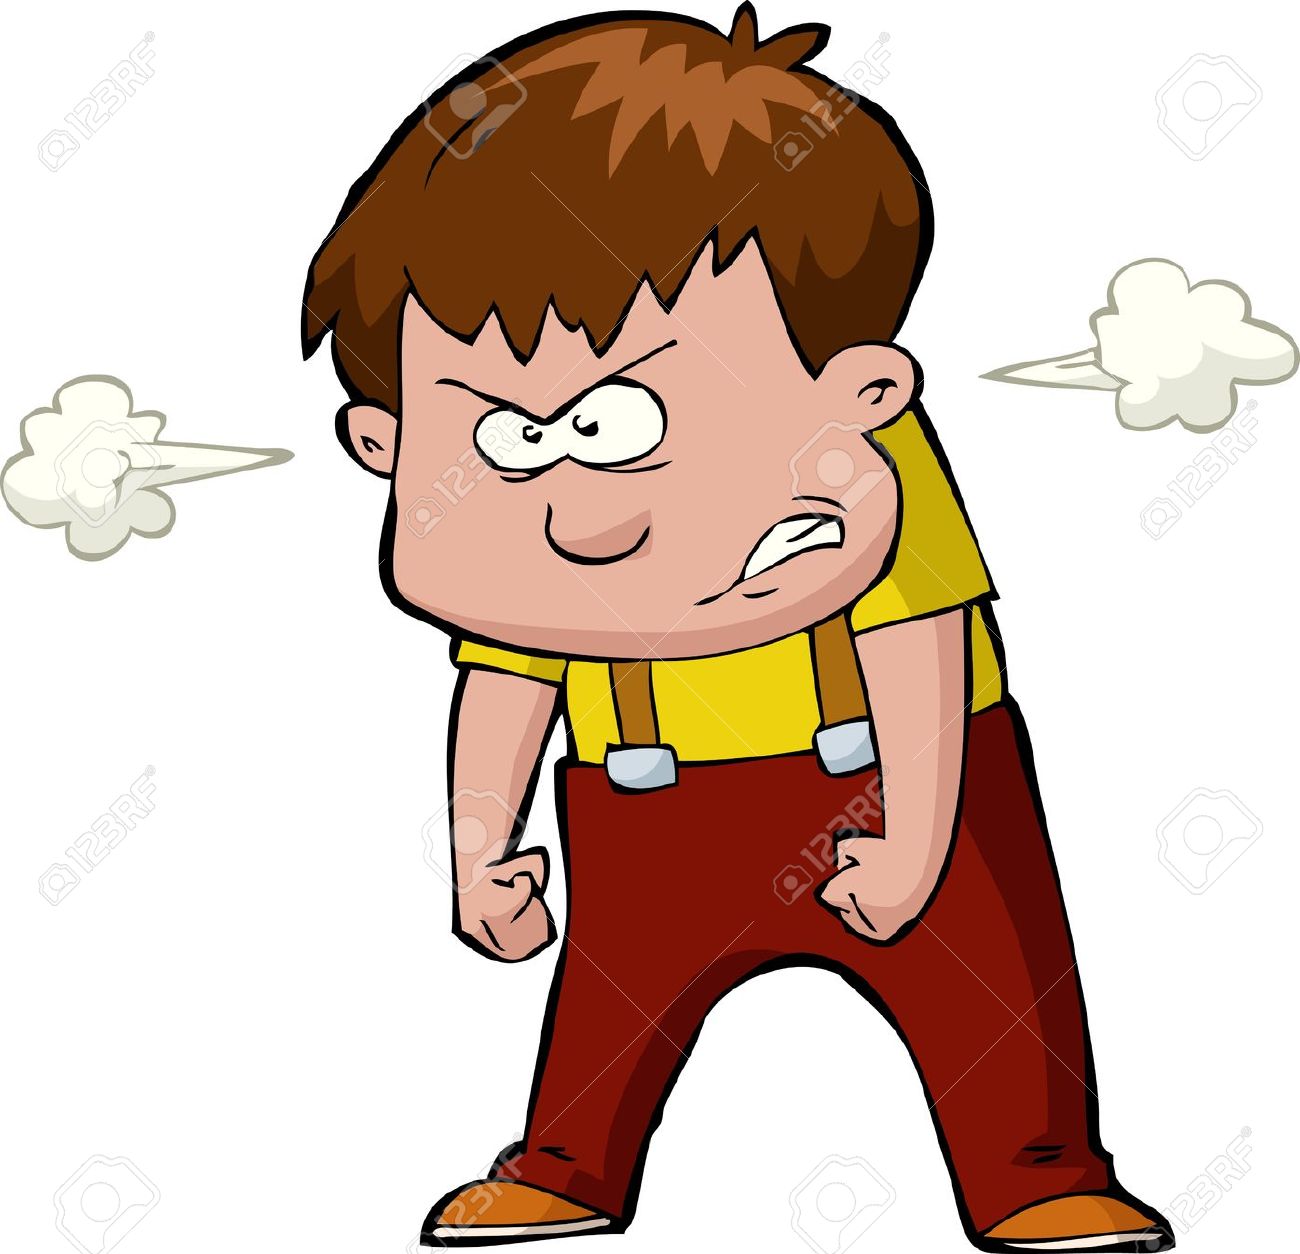 Anger clipart #10, Download drawings